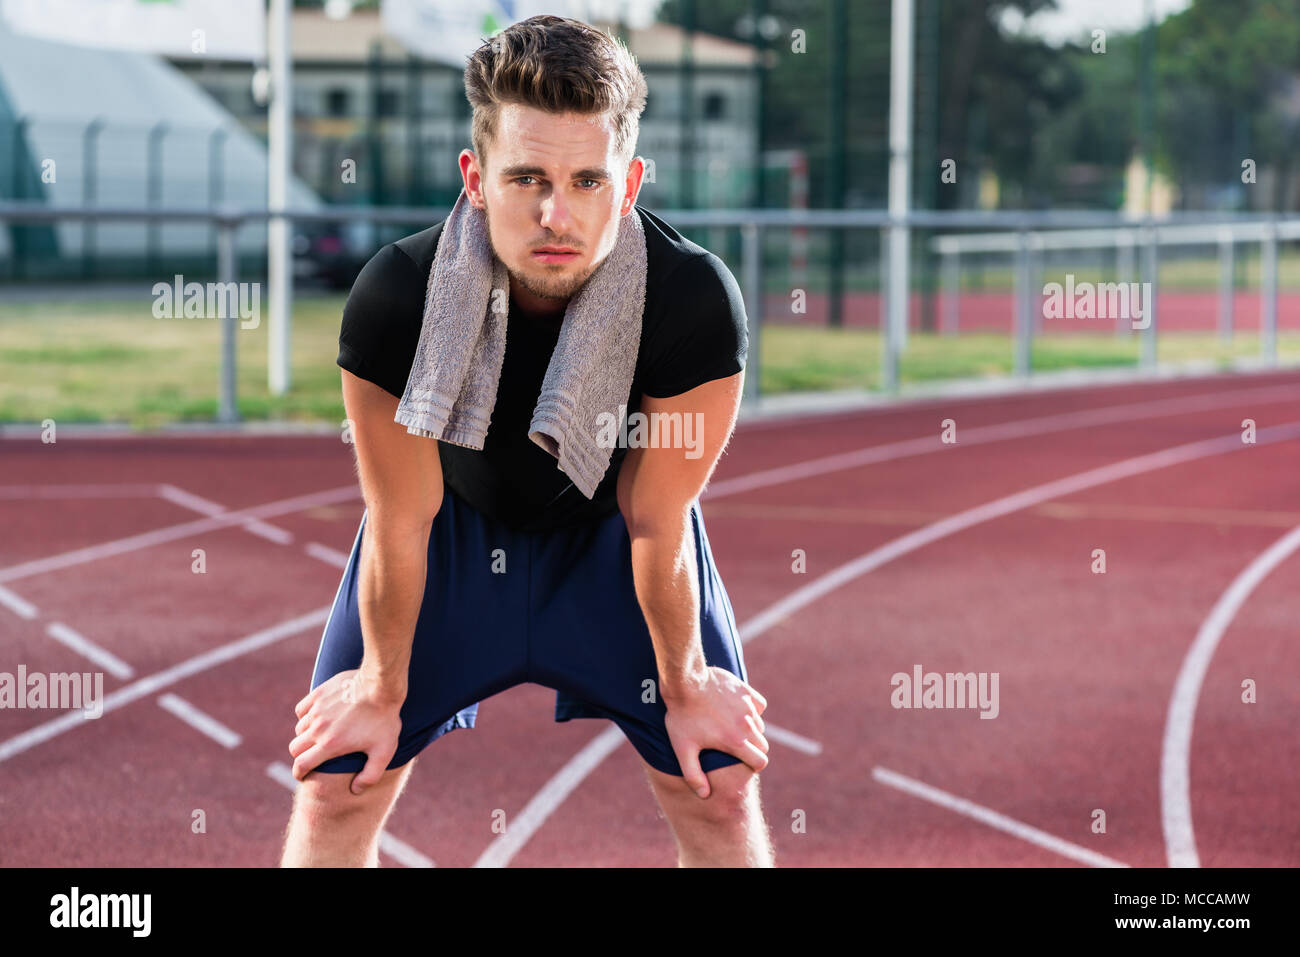 Athlete stretching on racing track before running Stock Photo - Alamy